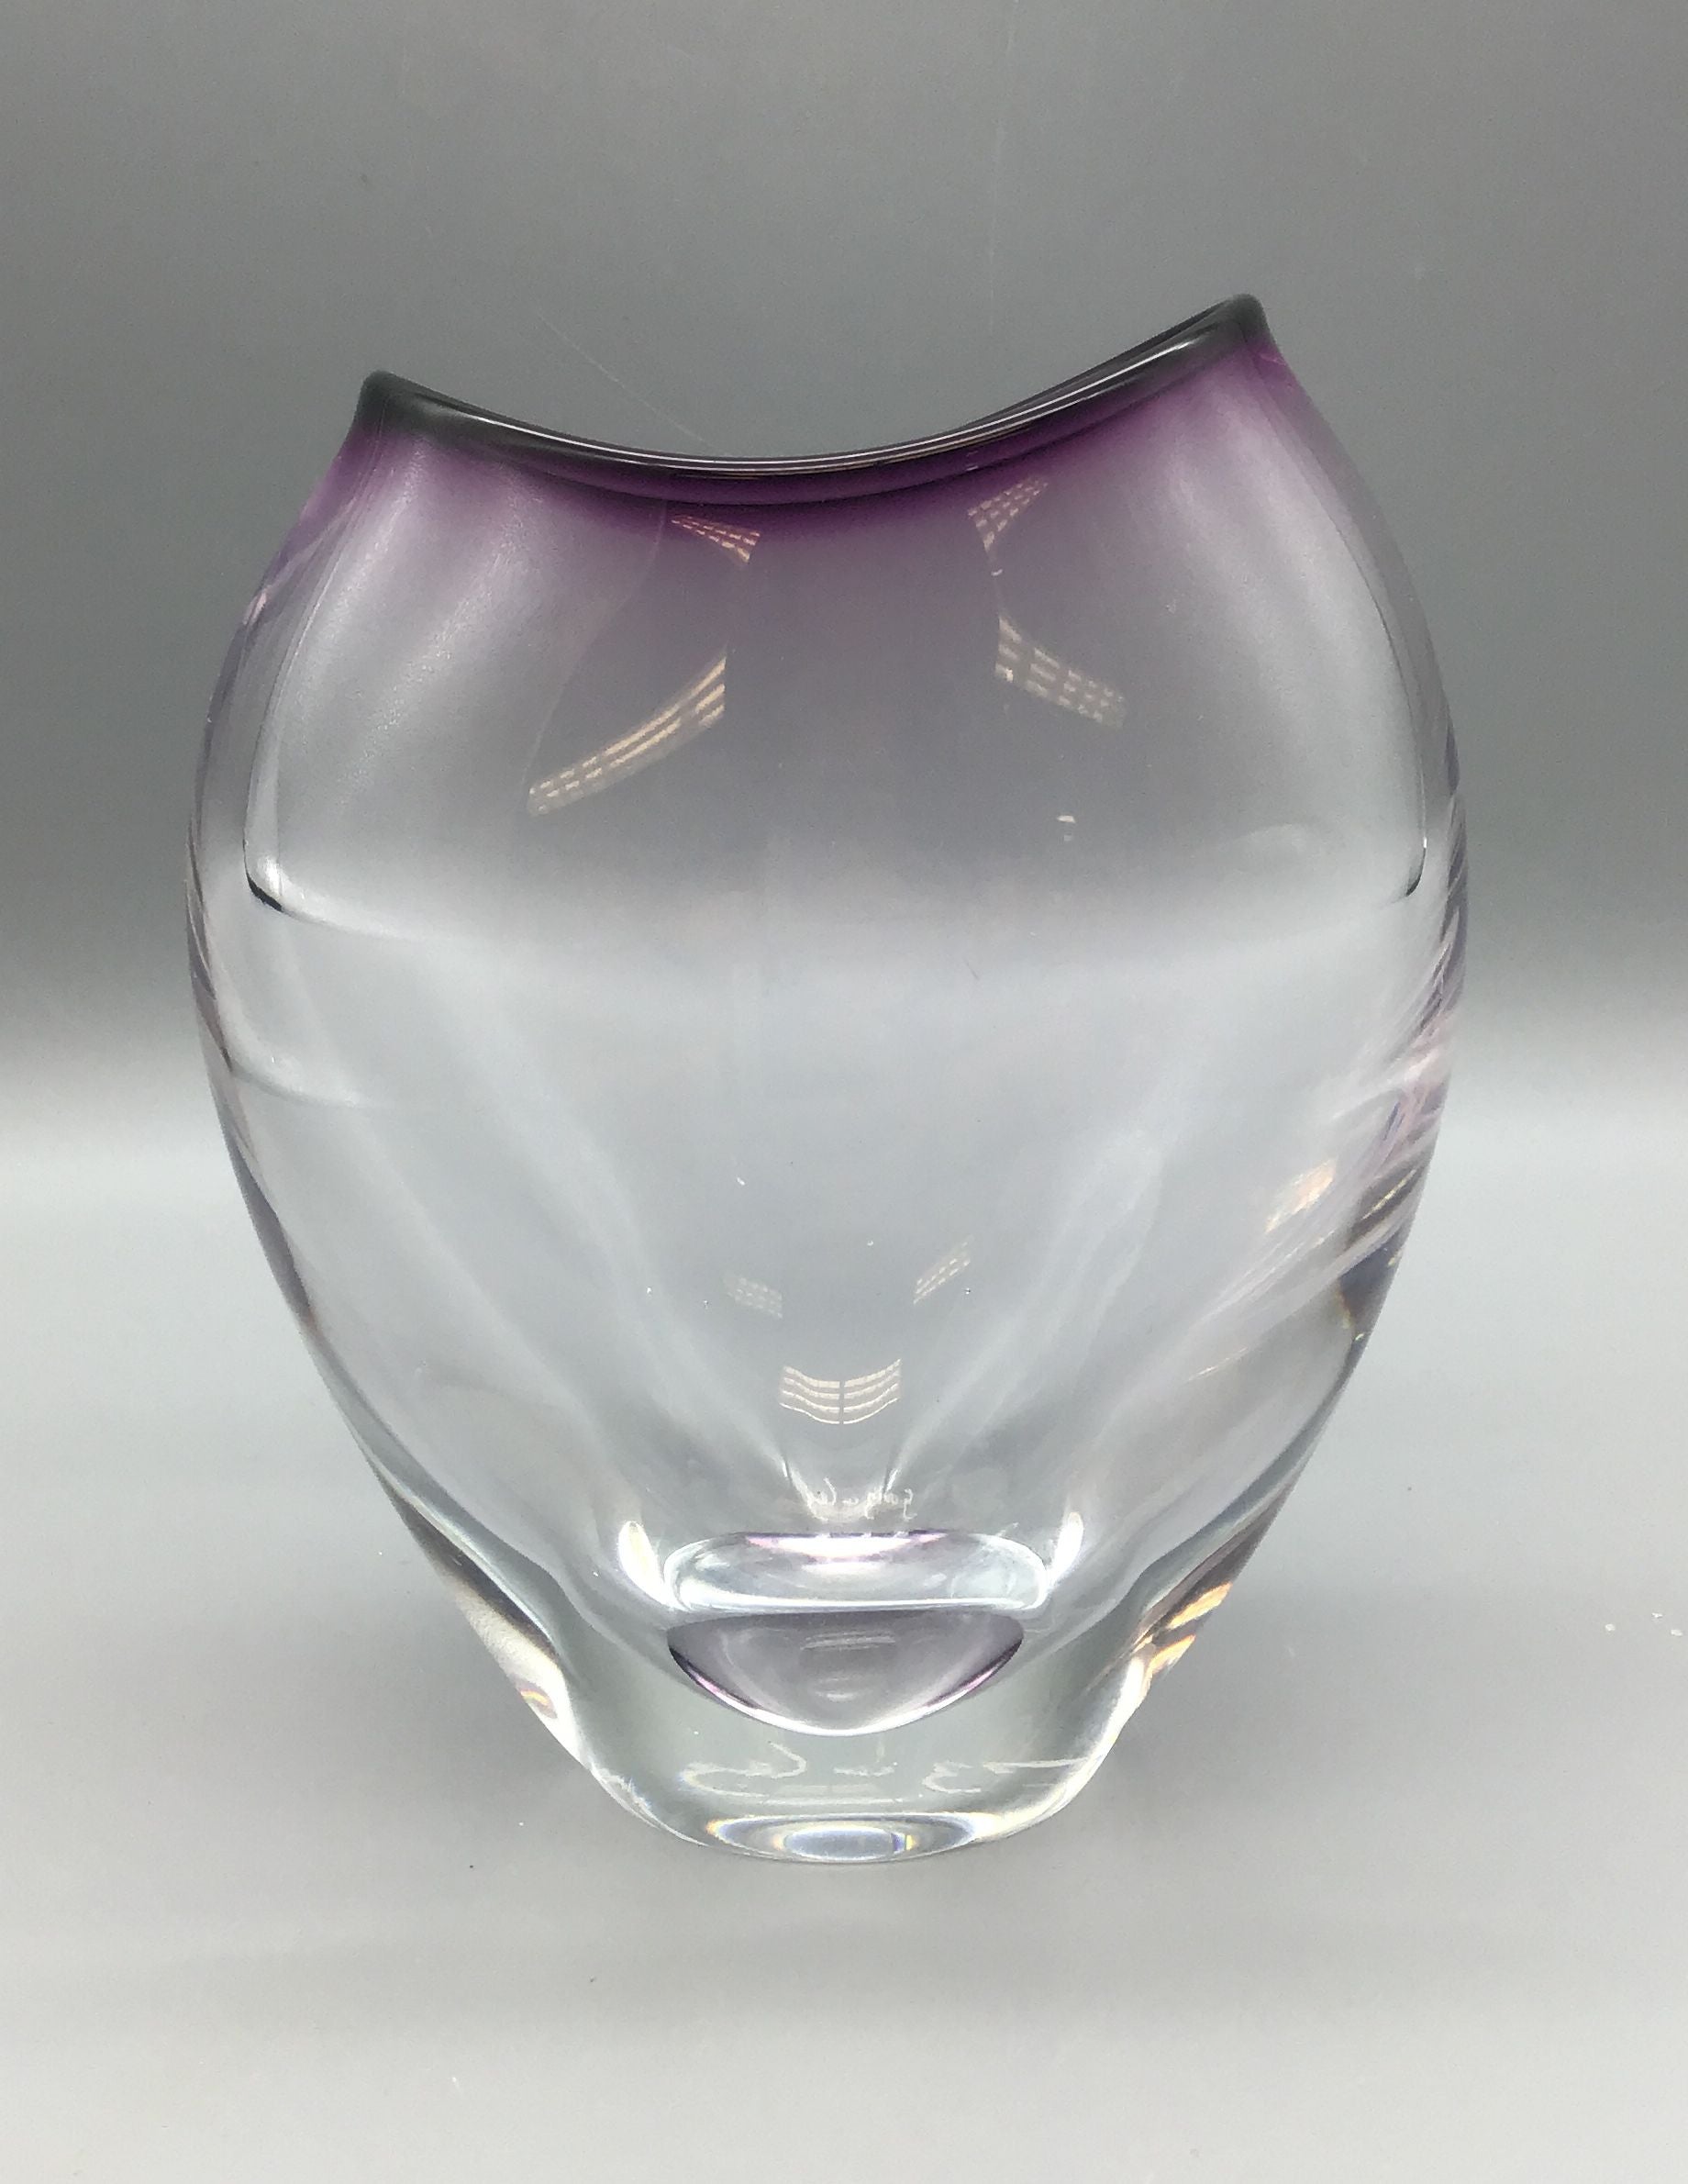 Small Signed Don Gonzalez Contemporary Handblown Glass Vase with Amethyst Rim